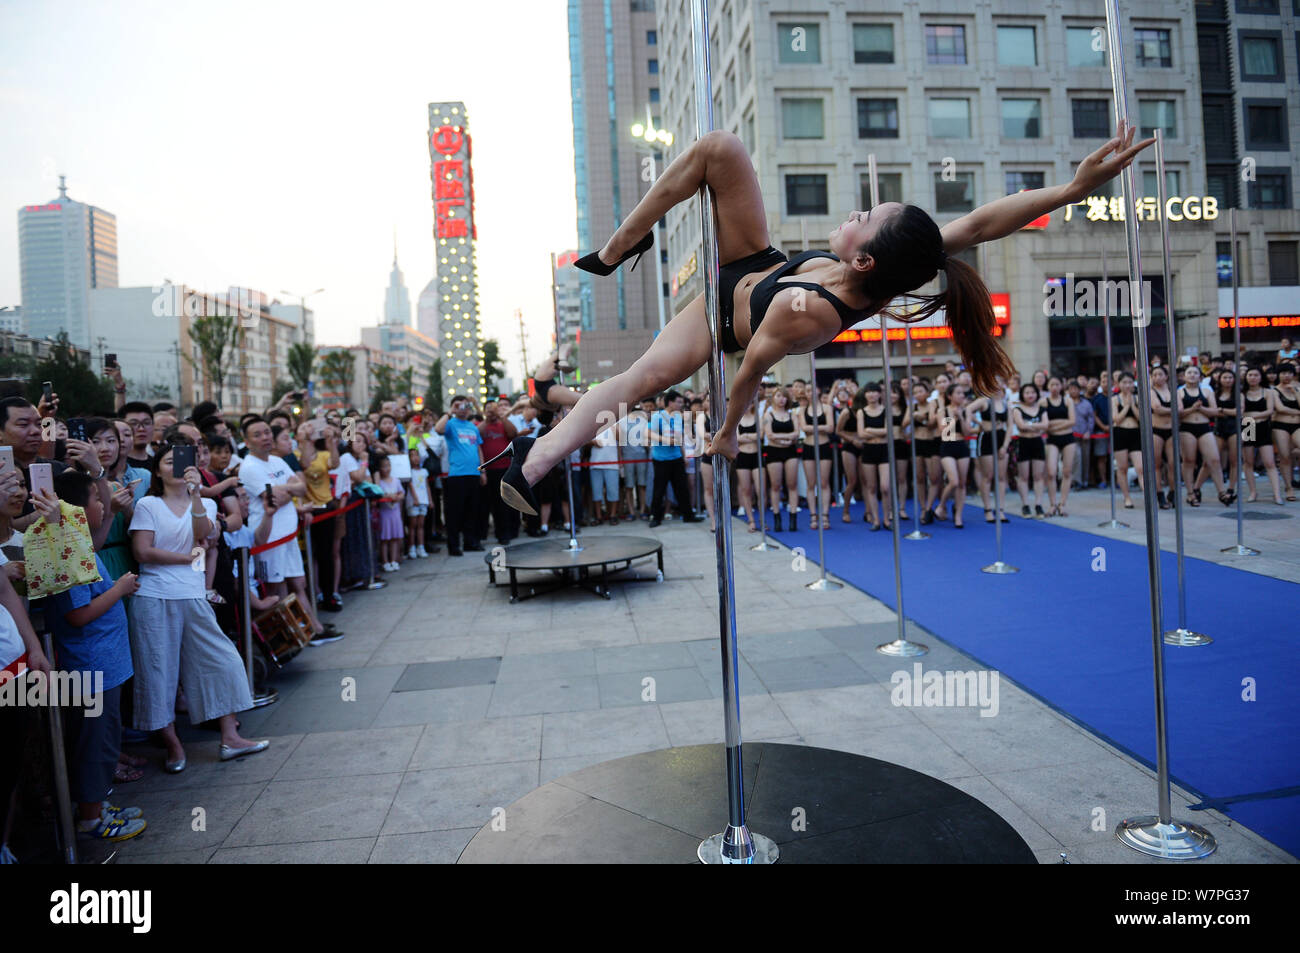 A Chinese woman performs pole dancing on a square in Ji'nan city, east China's Shandong province, 17 June 2017.   Square dancing does not belong to Ch Stock Photo